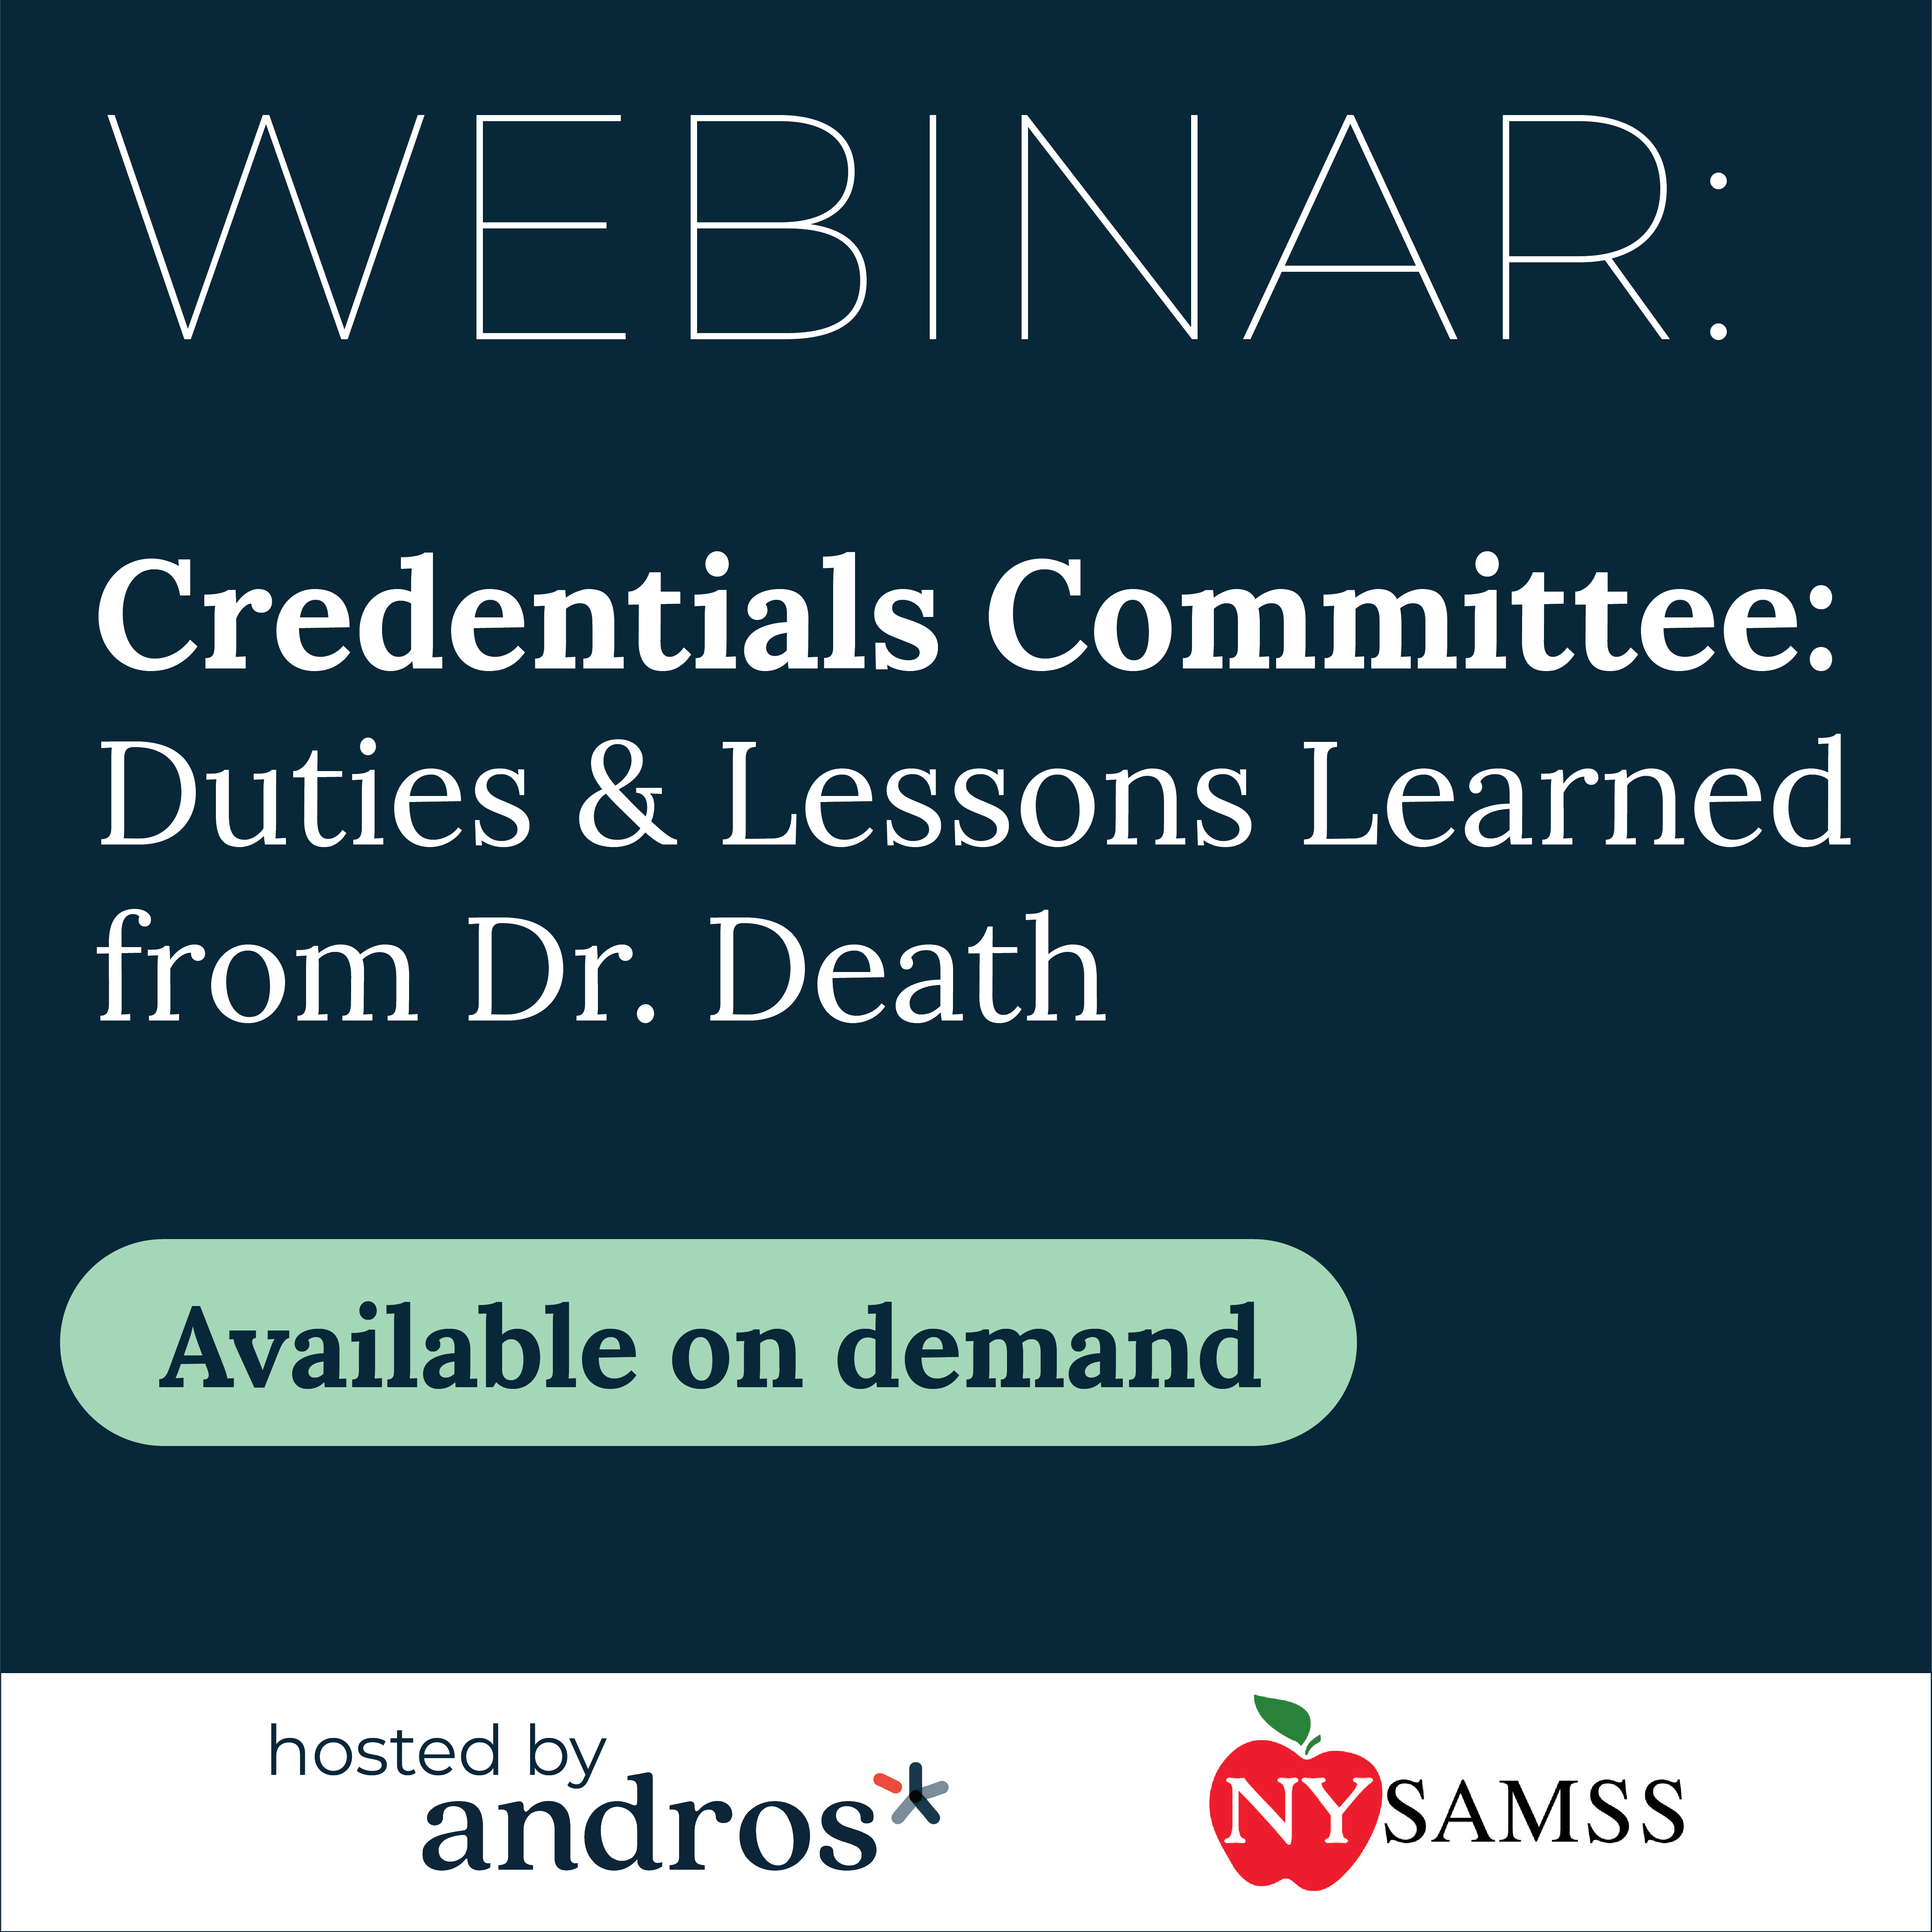 Credentials Committee: Duties & Lessons Learned from Dr. Death - andros